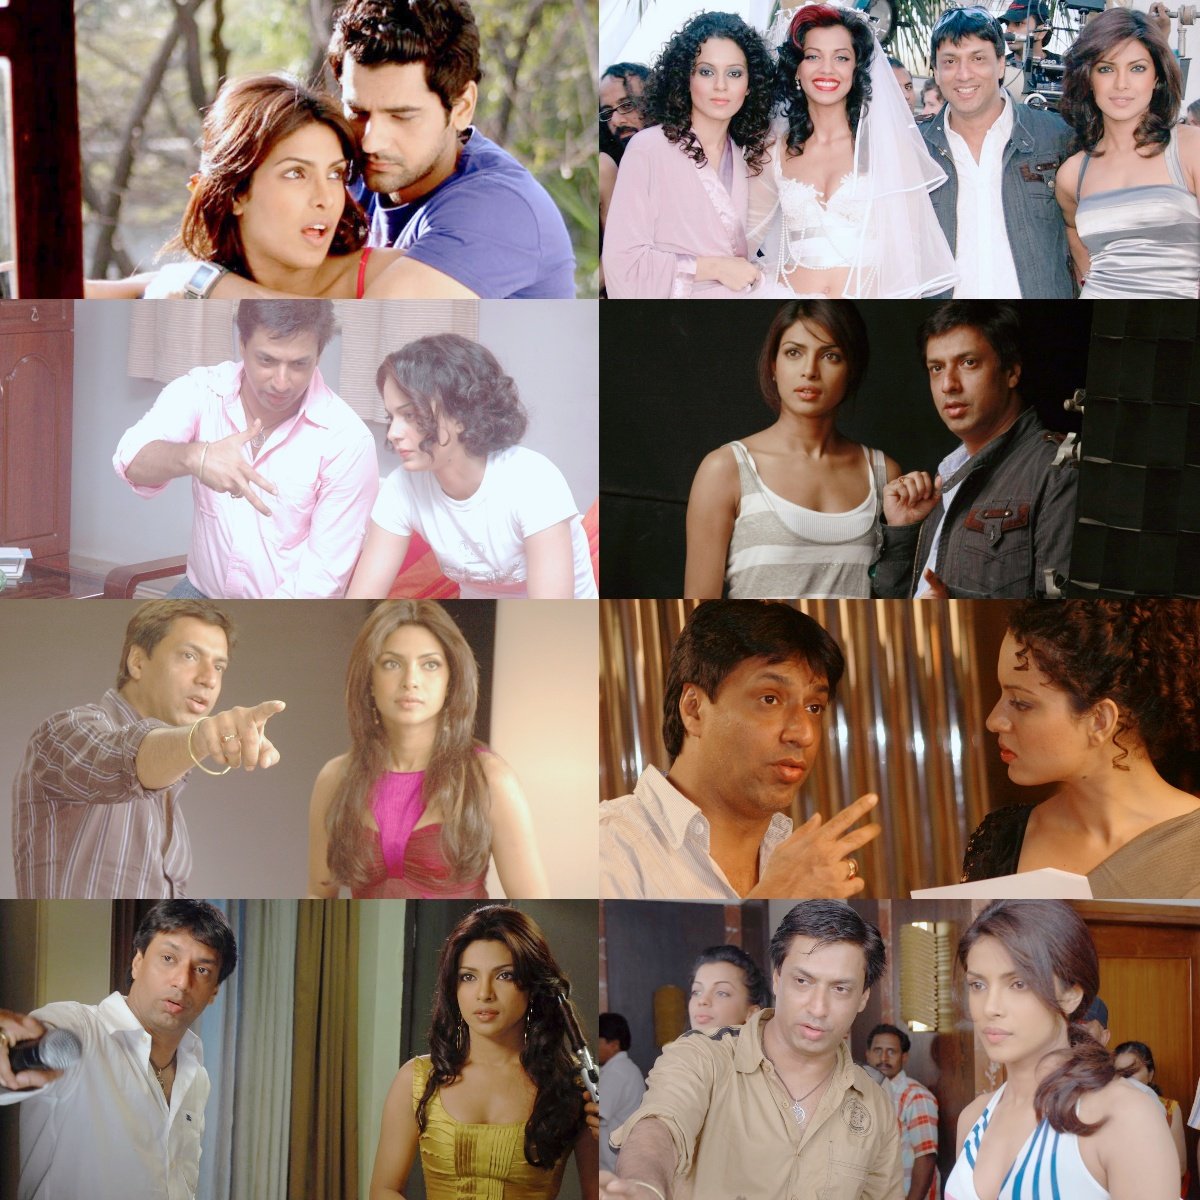 An absolutely wonderful/brilliant movie directed by  @imbhandarkar!Kudos to  @priyankachopra, Kangana and  @mugdhagodse267for bringing life to their characters!PC was PERFECT and IMPRESSIVE as Meghna!KR was AWESOME and MG made a GREAT debut!A MUST WATCH! #10YearsOfFashion 